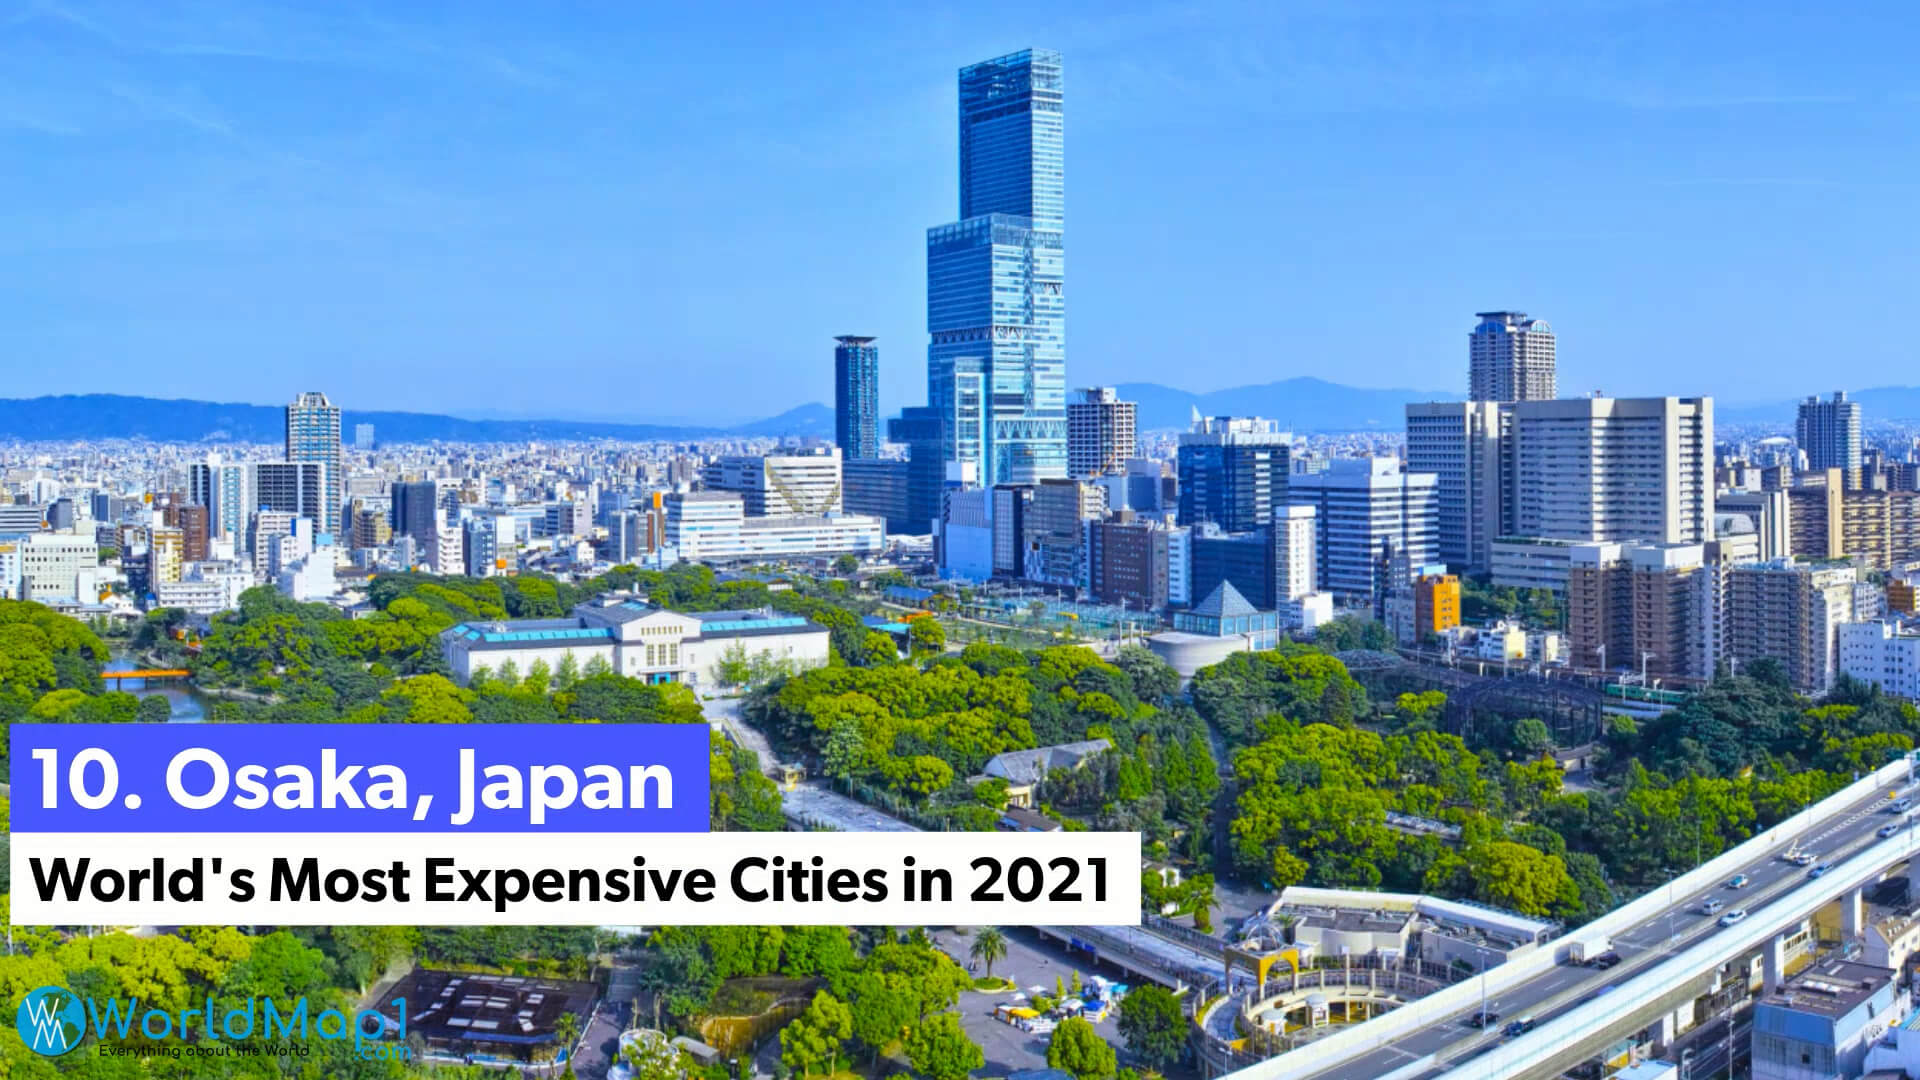 World's Most Expensive Cities - Osaka, Japan